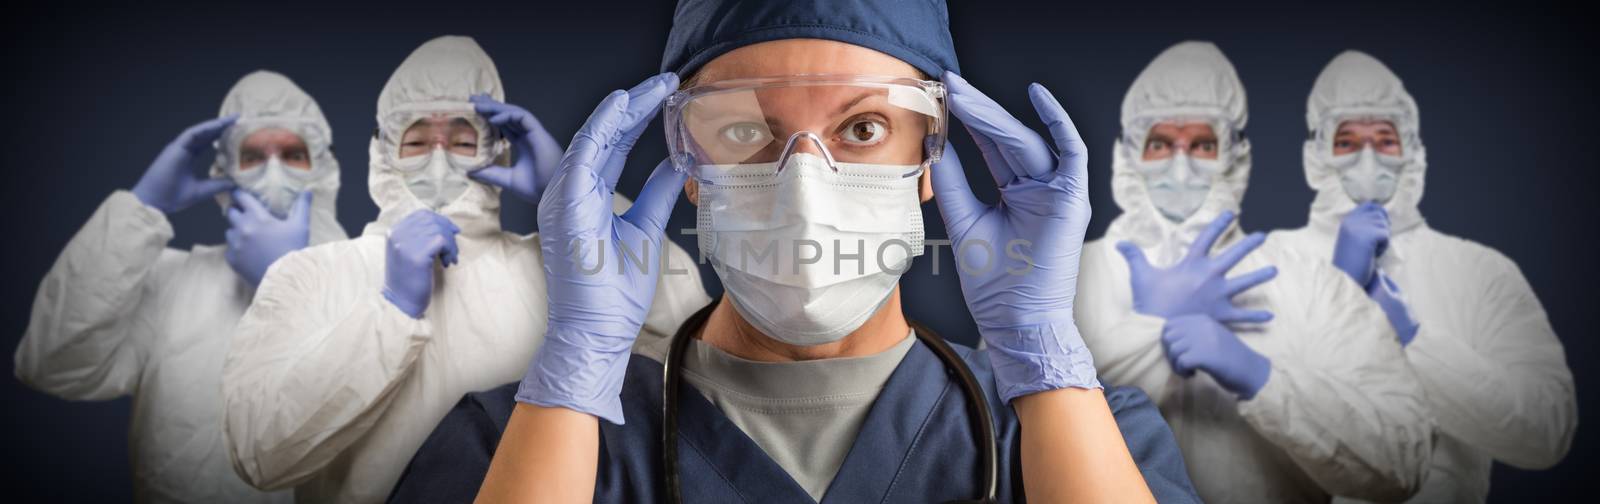 Team of Female and Male Doctors or Nurses Wearing Protective Medical Face Masks and Goggles Banner. by Feverpitched